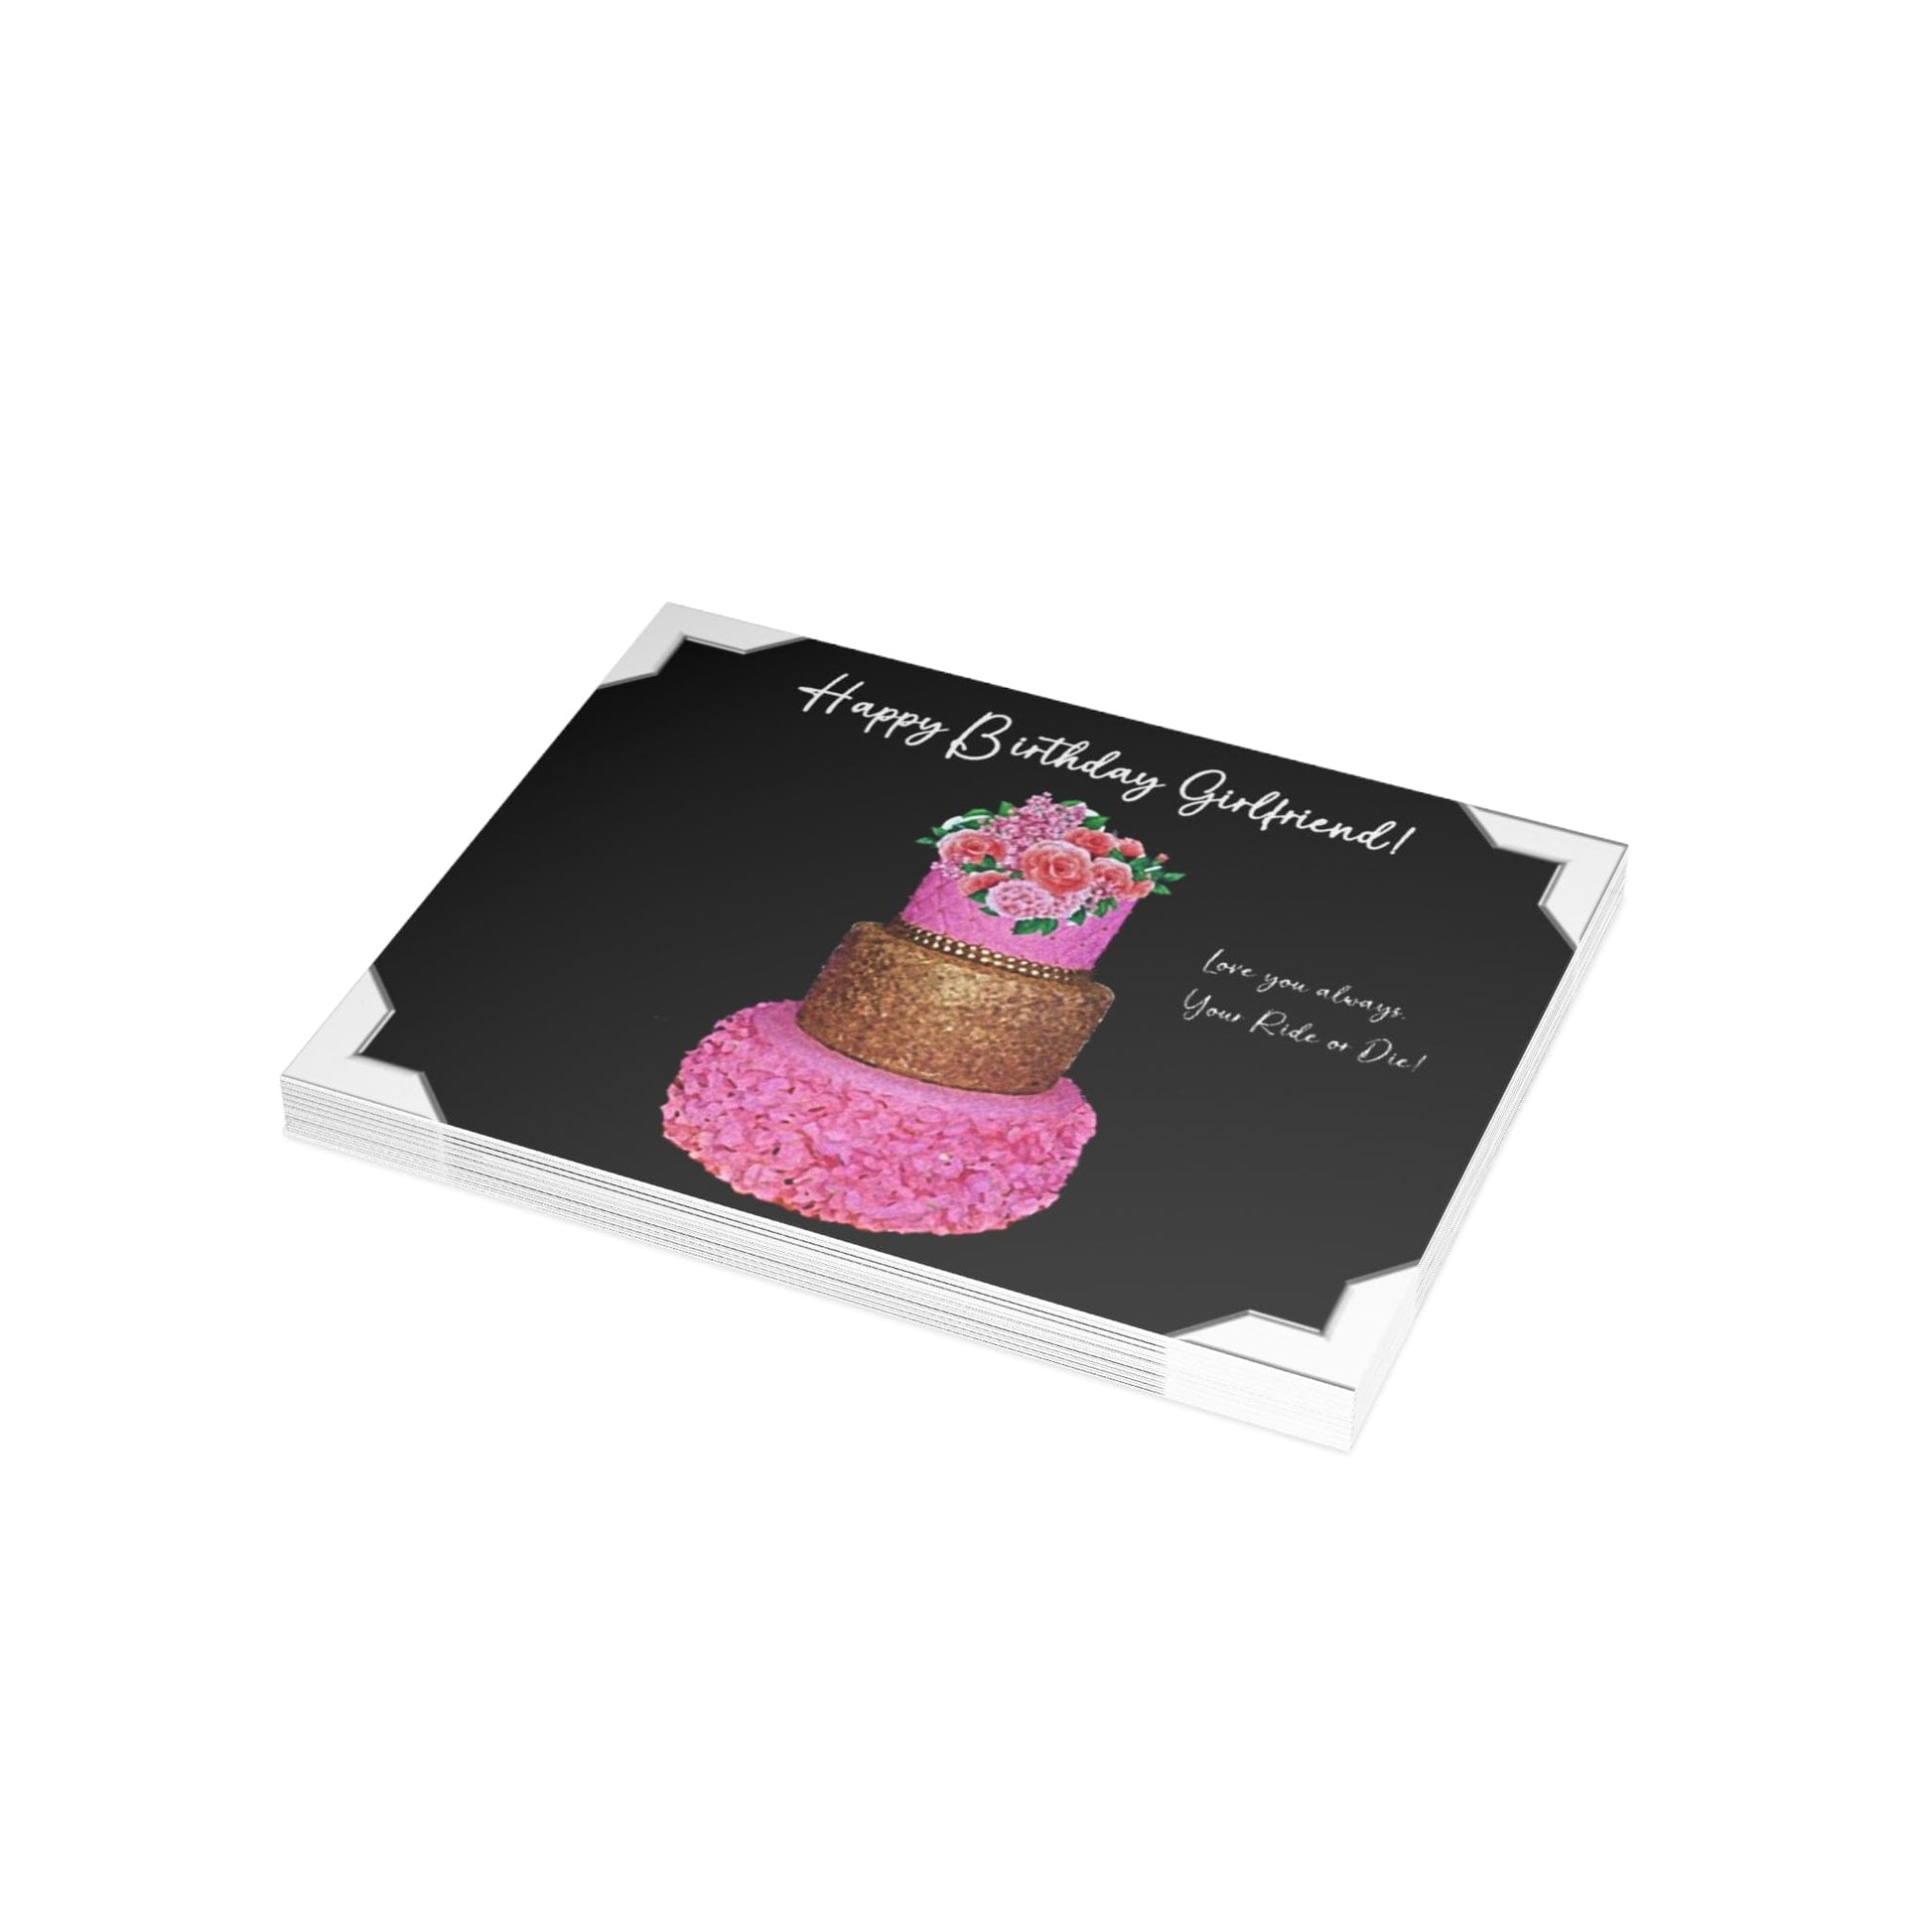 Personalized Note Card: Add a Personal Touch with Customized Stationery for Every Occasion. Happy Birthday Girlfriend Notecard